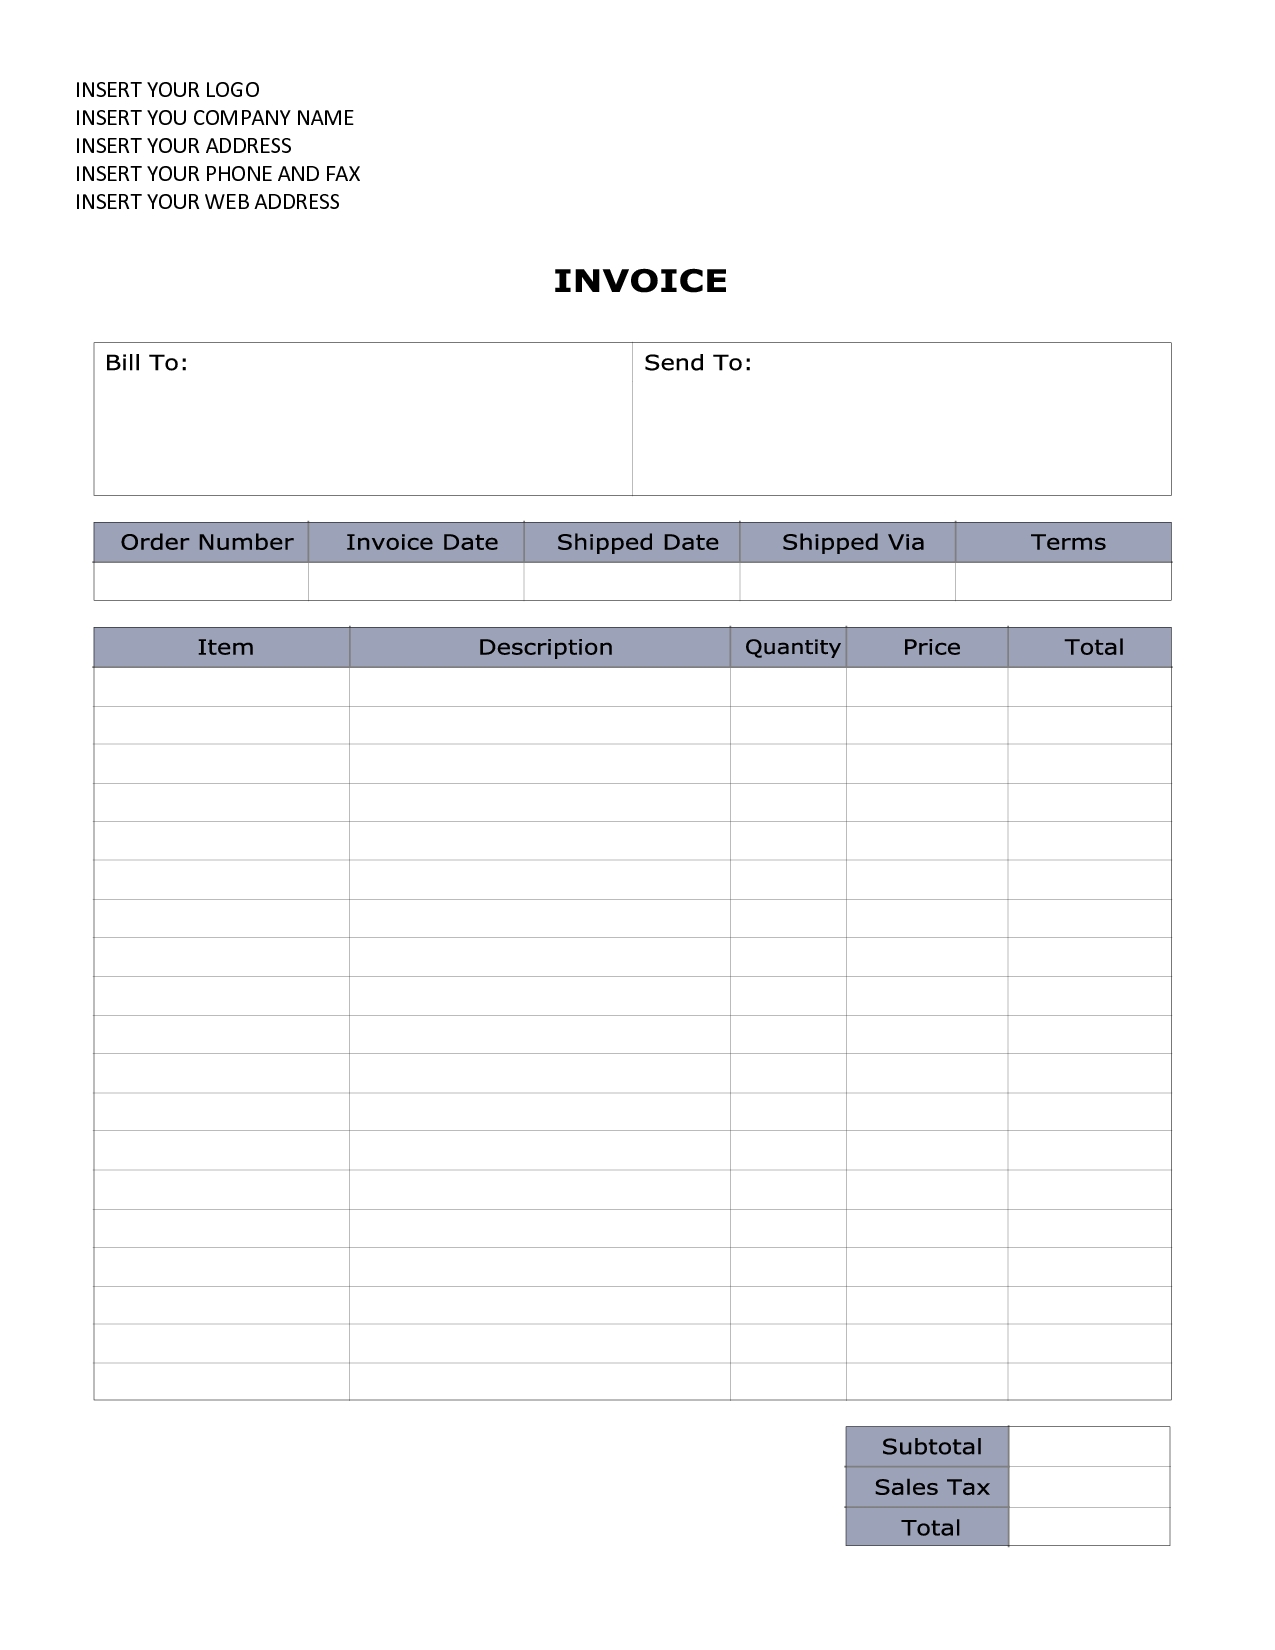 invoice template word 2007 invoice template for word invoice word templates invoice